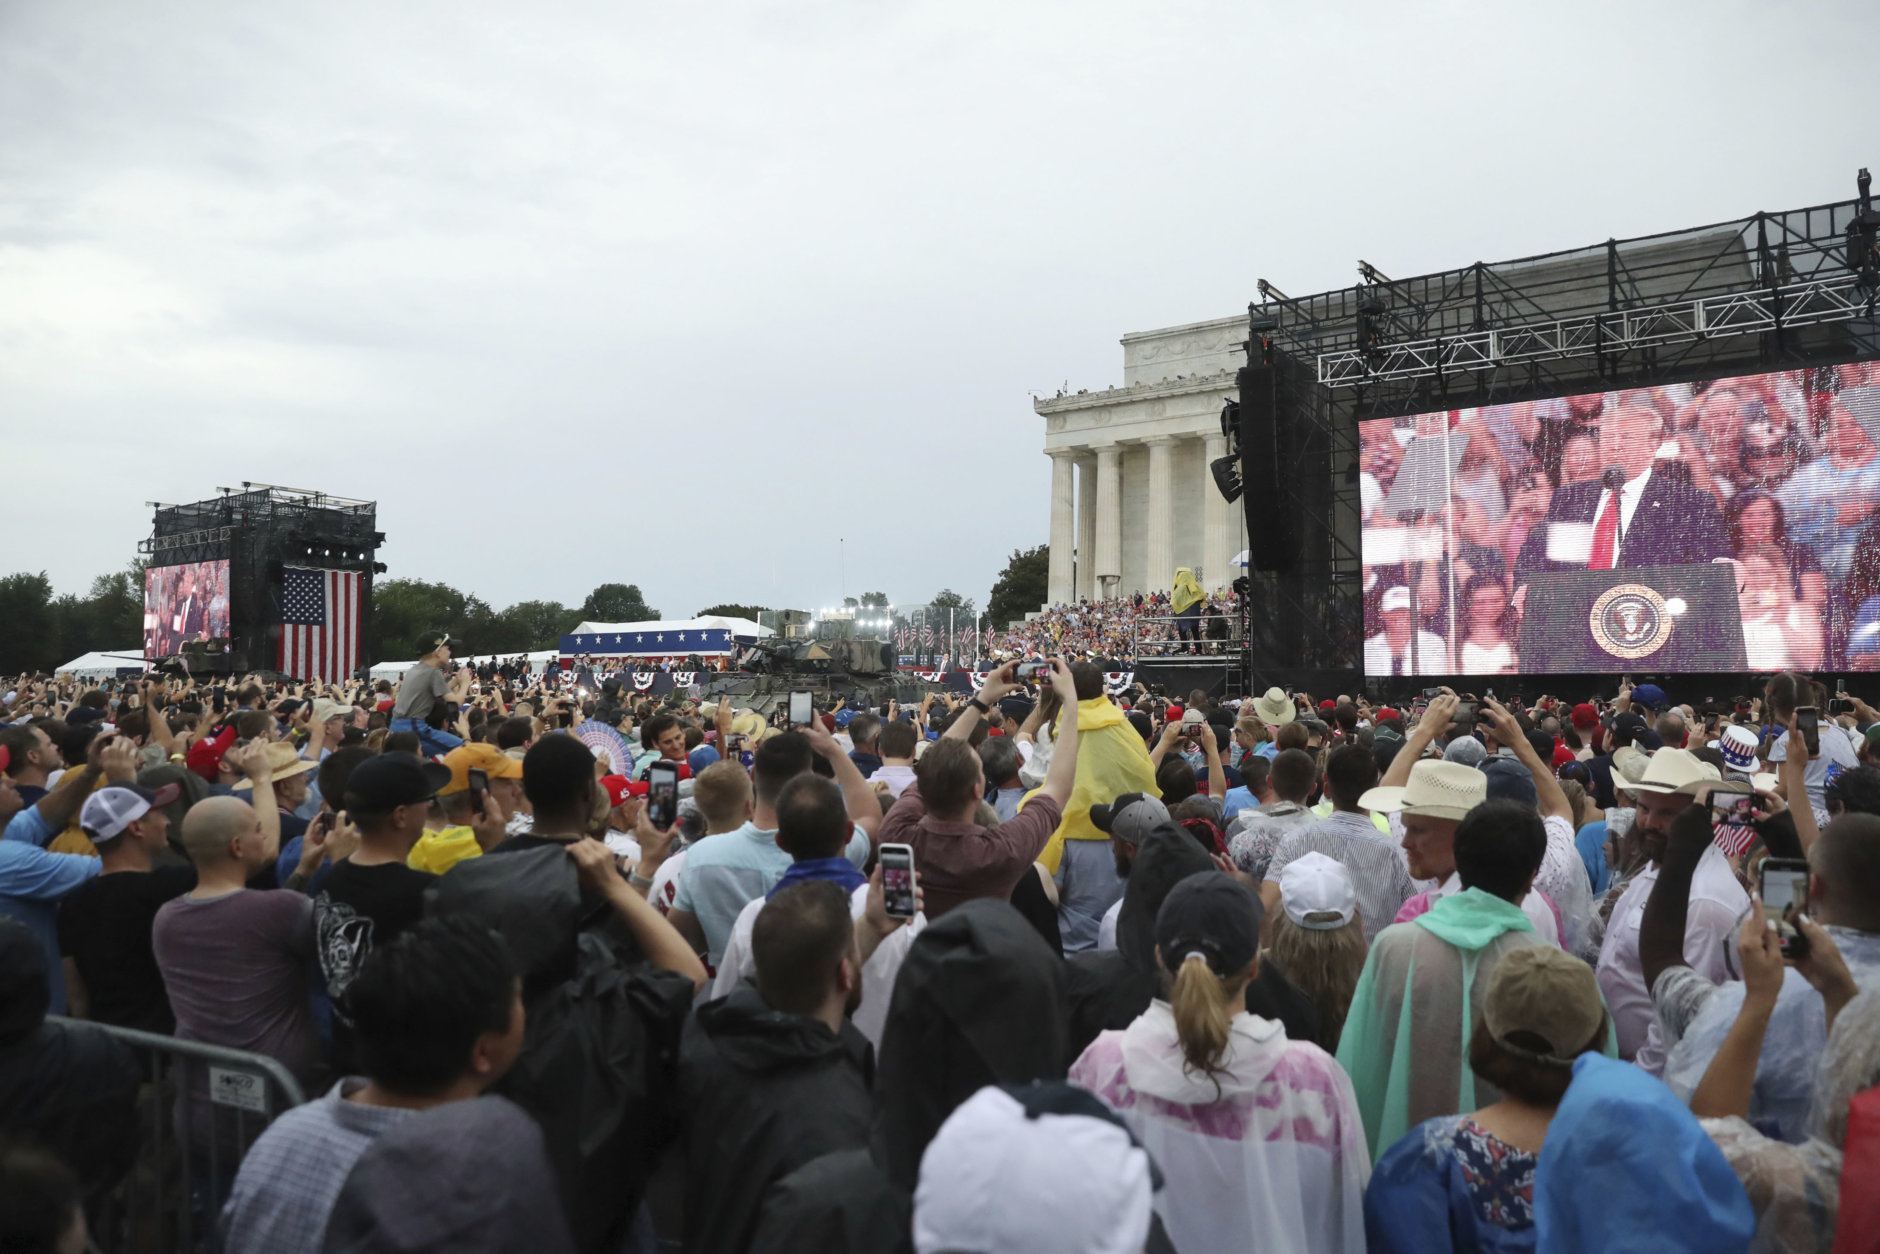 President Donald Trump is seen on a large screen speaking during an Independence Day celebration in front of the Lincoln Memorial in Washington, Thursday, July 4, 2019. (AP Photo/Andrew Harnik)